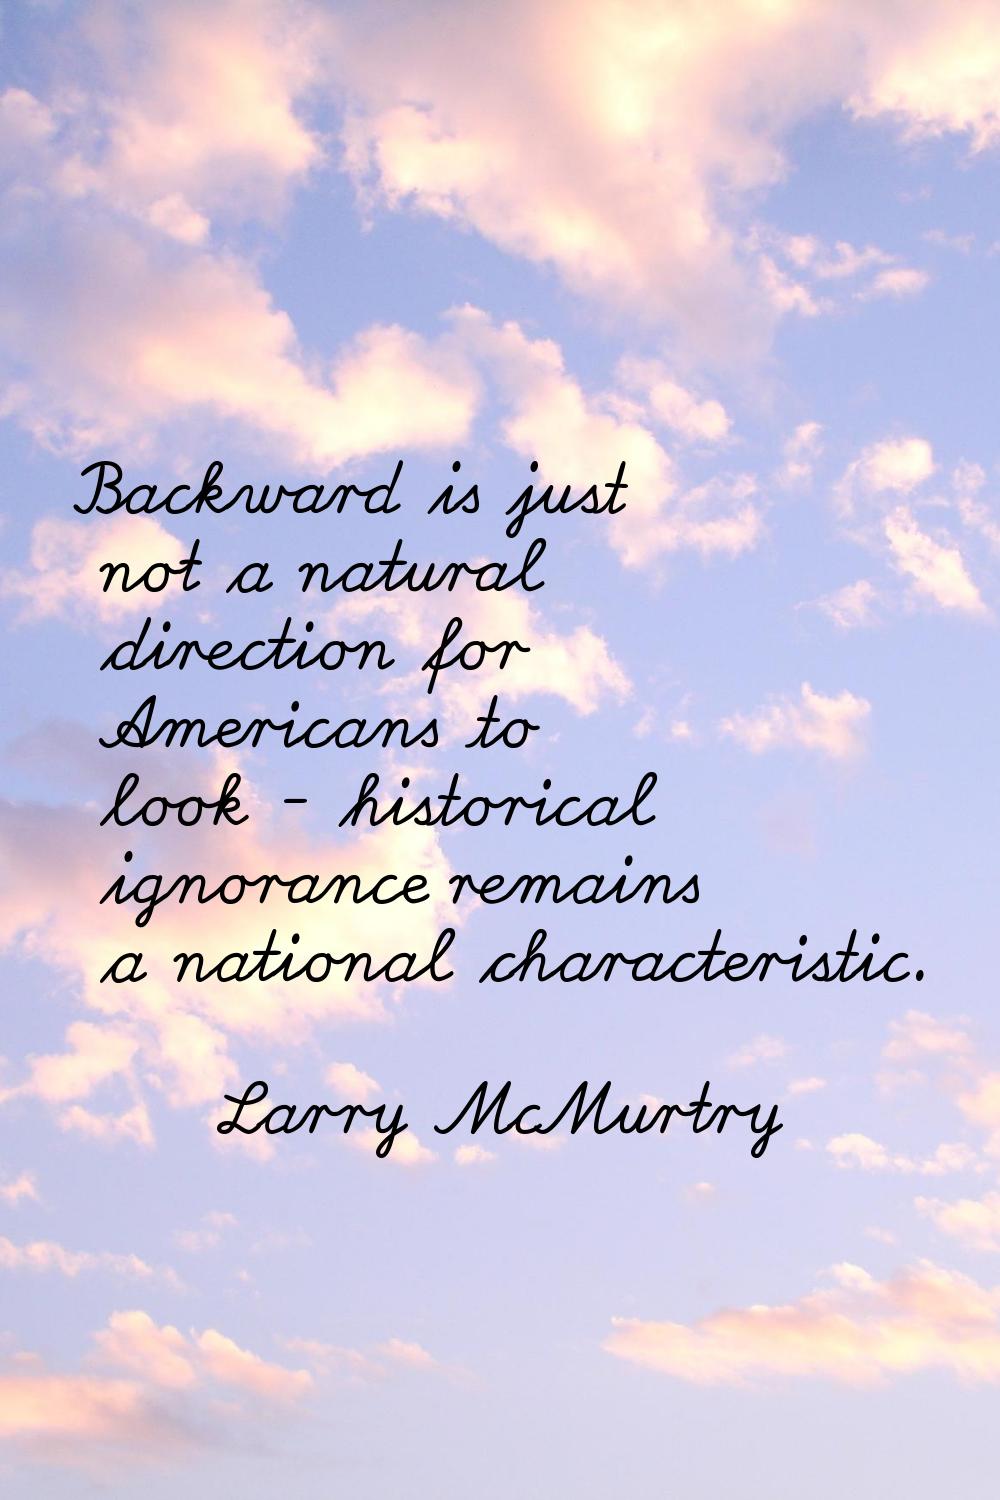 Backward is just not a natural direction for Americans to look - historical ignorance remains a nat